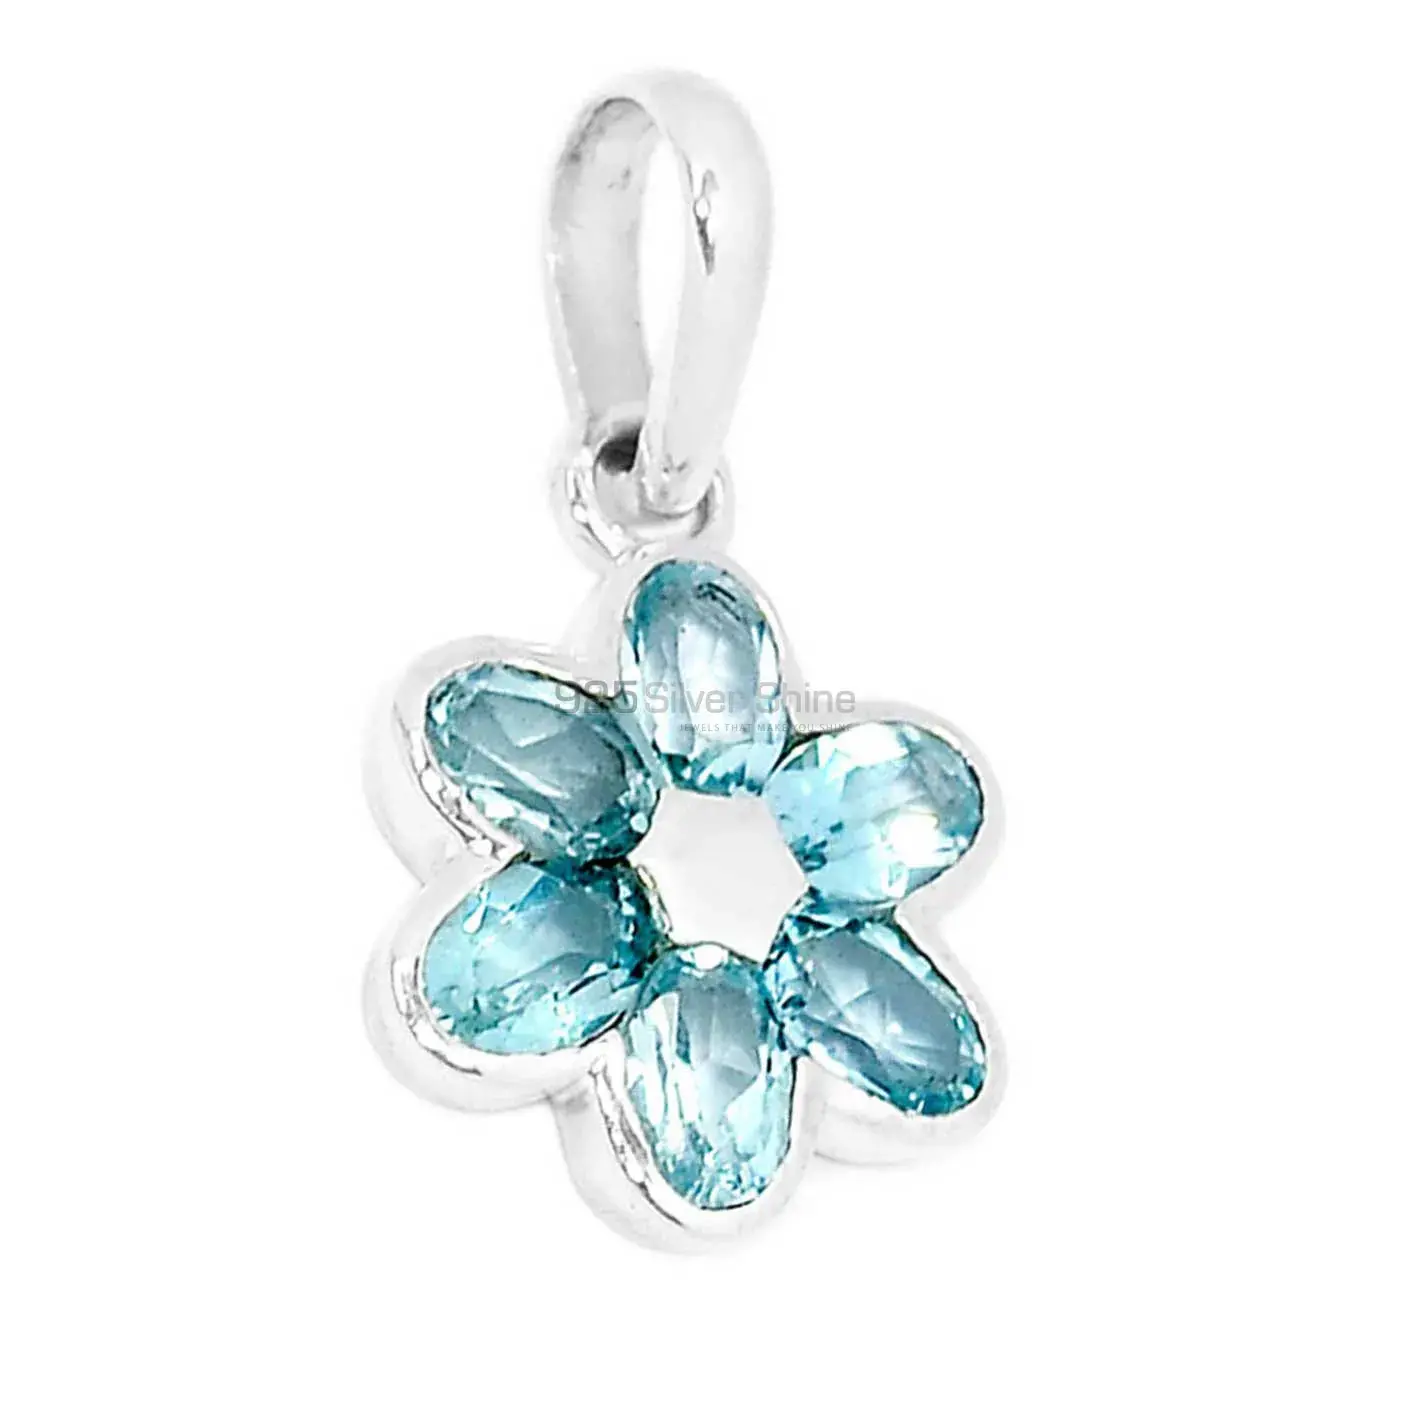 High Quality 925 Solid Silver Pendants Exporters In Blue Topaz Gemstone Jewelry 925SSP303-2_1